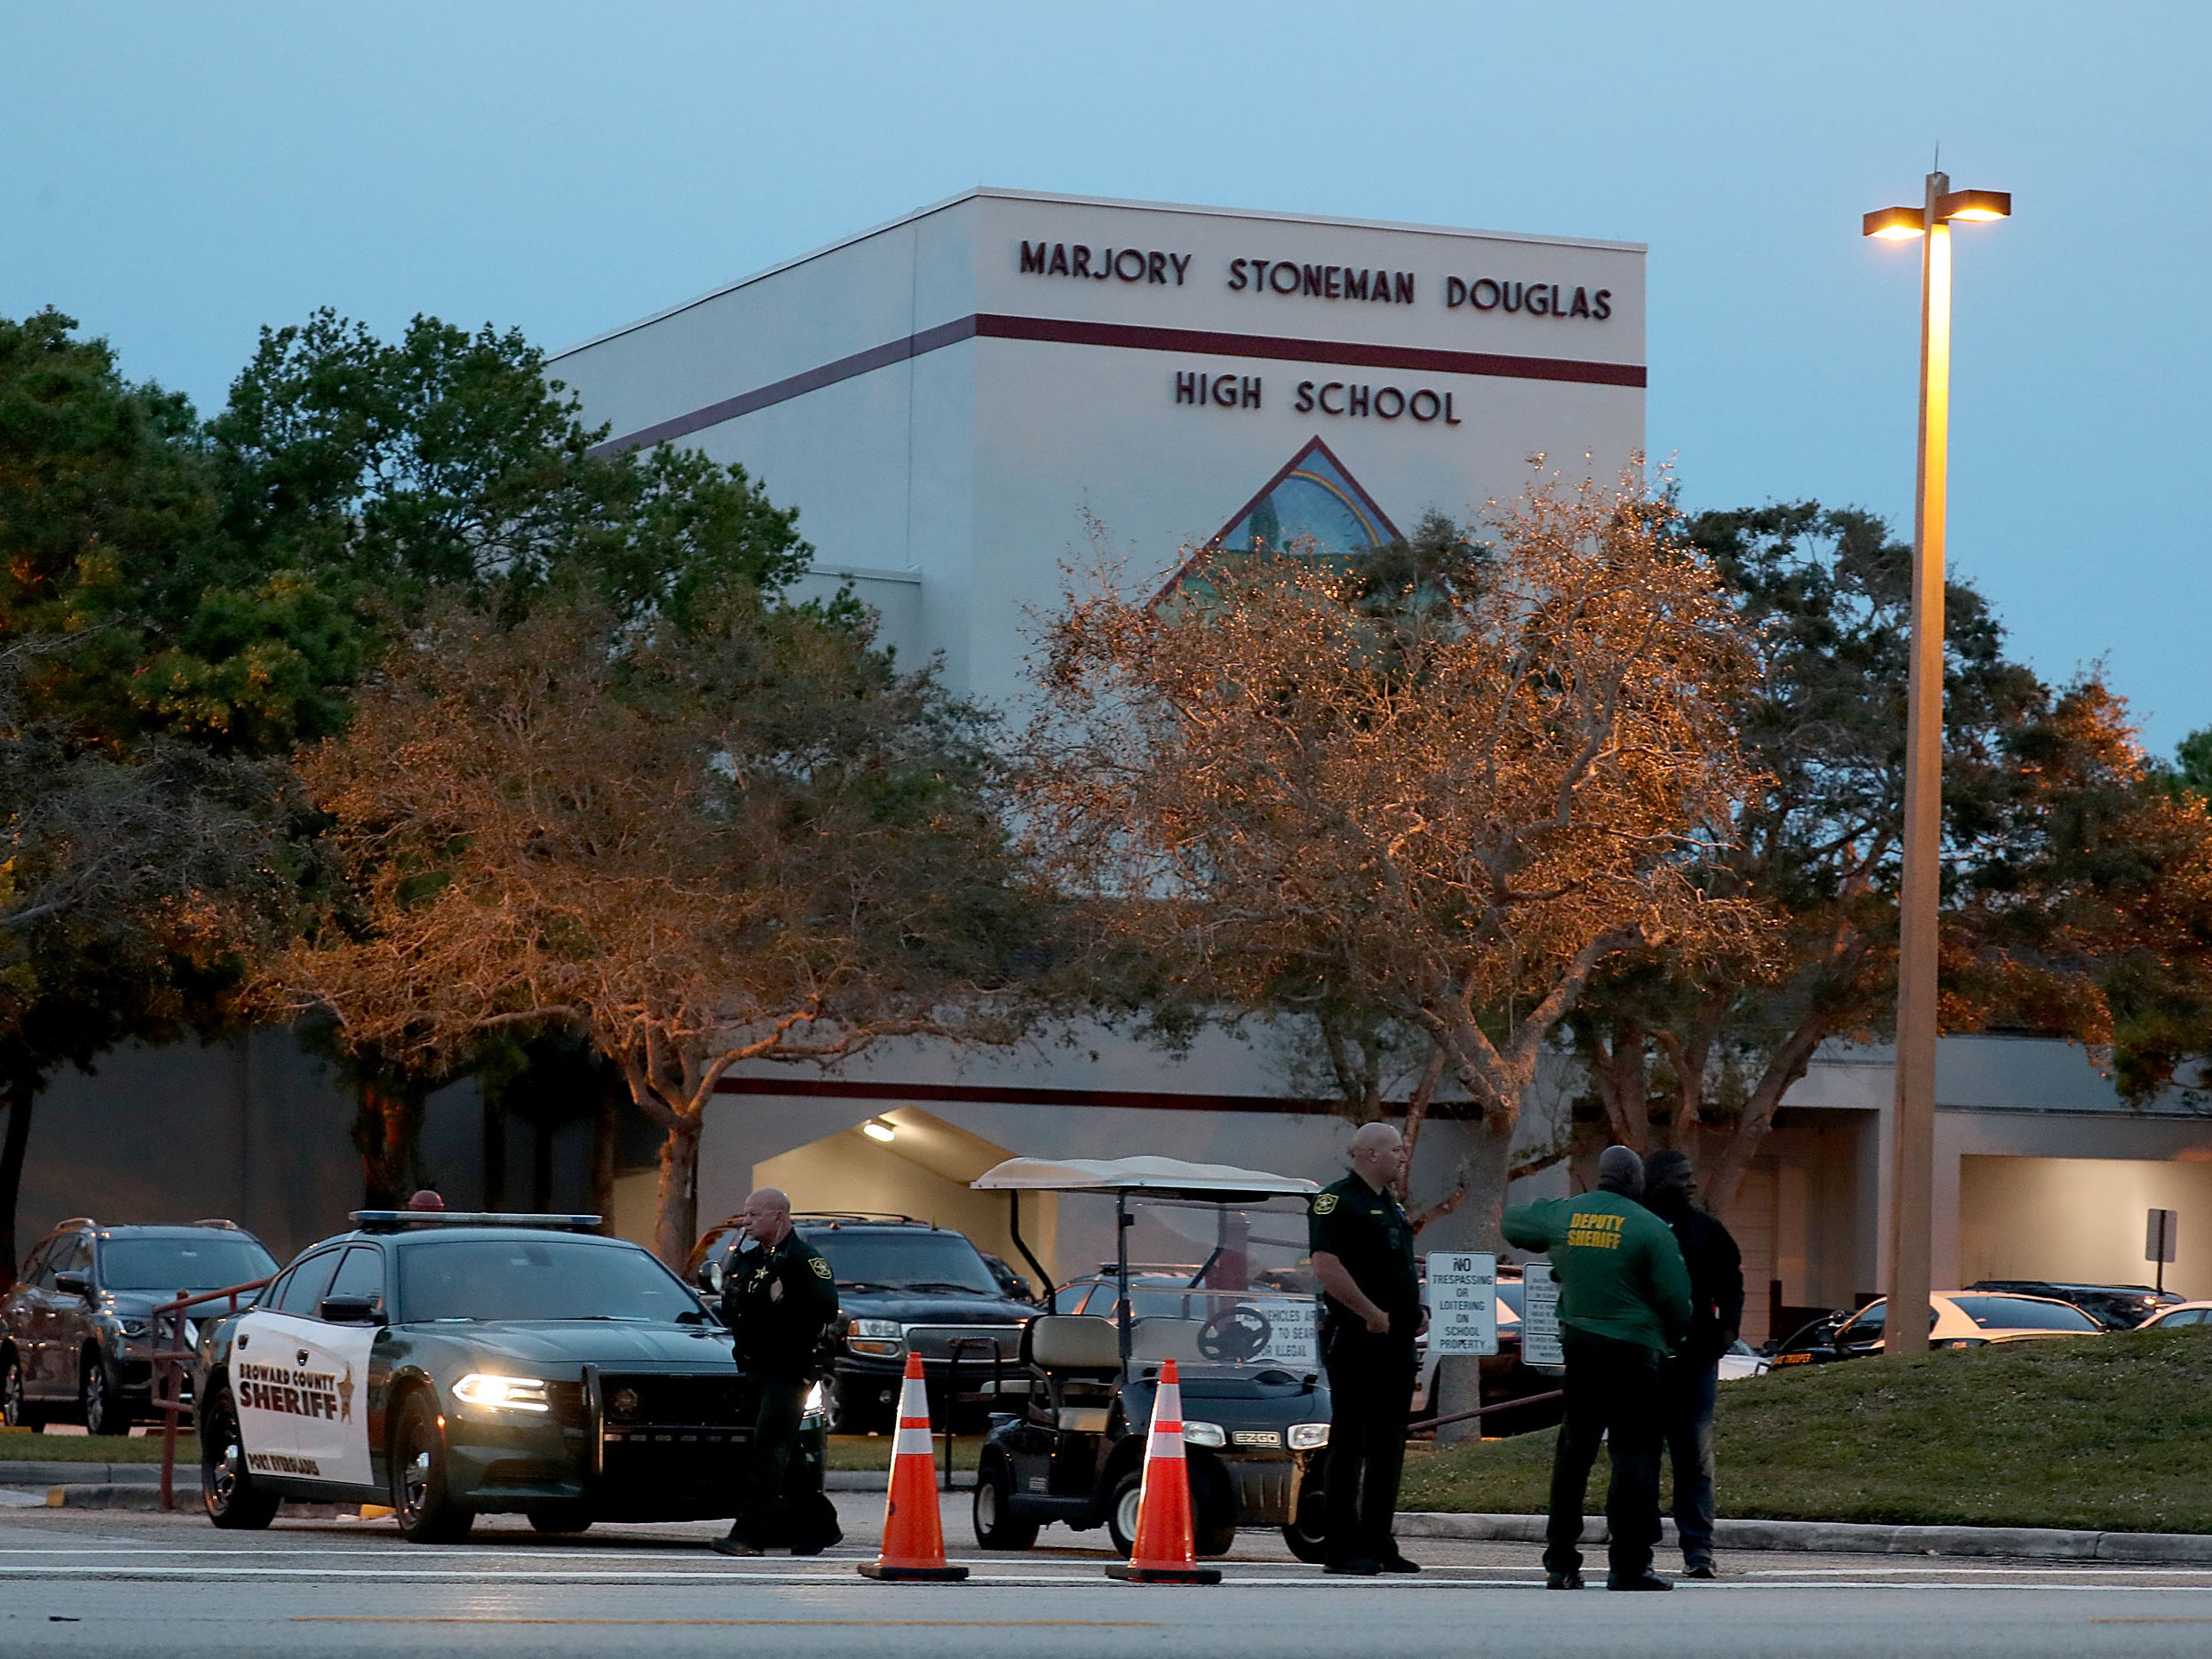 Police officers outside Marjory Stoneman Douglass High School in Parkland, Florida on the one year anniversary of the 2018 mass shooting